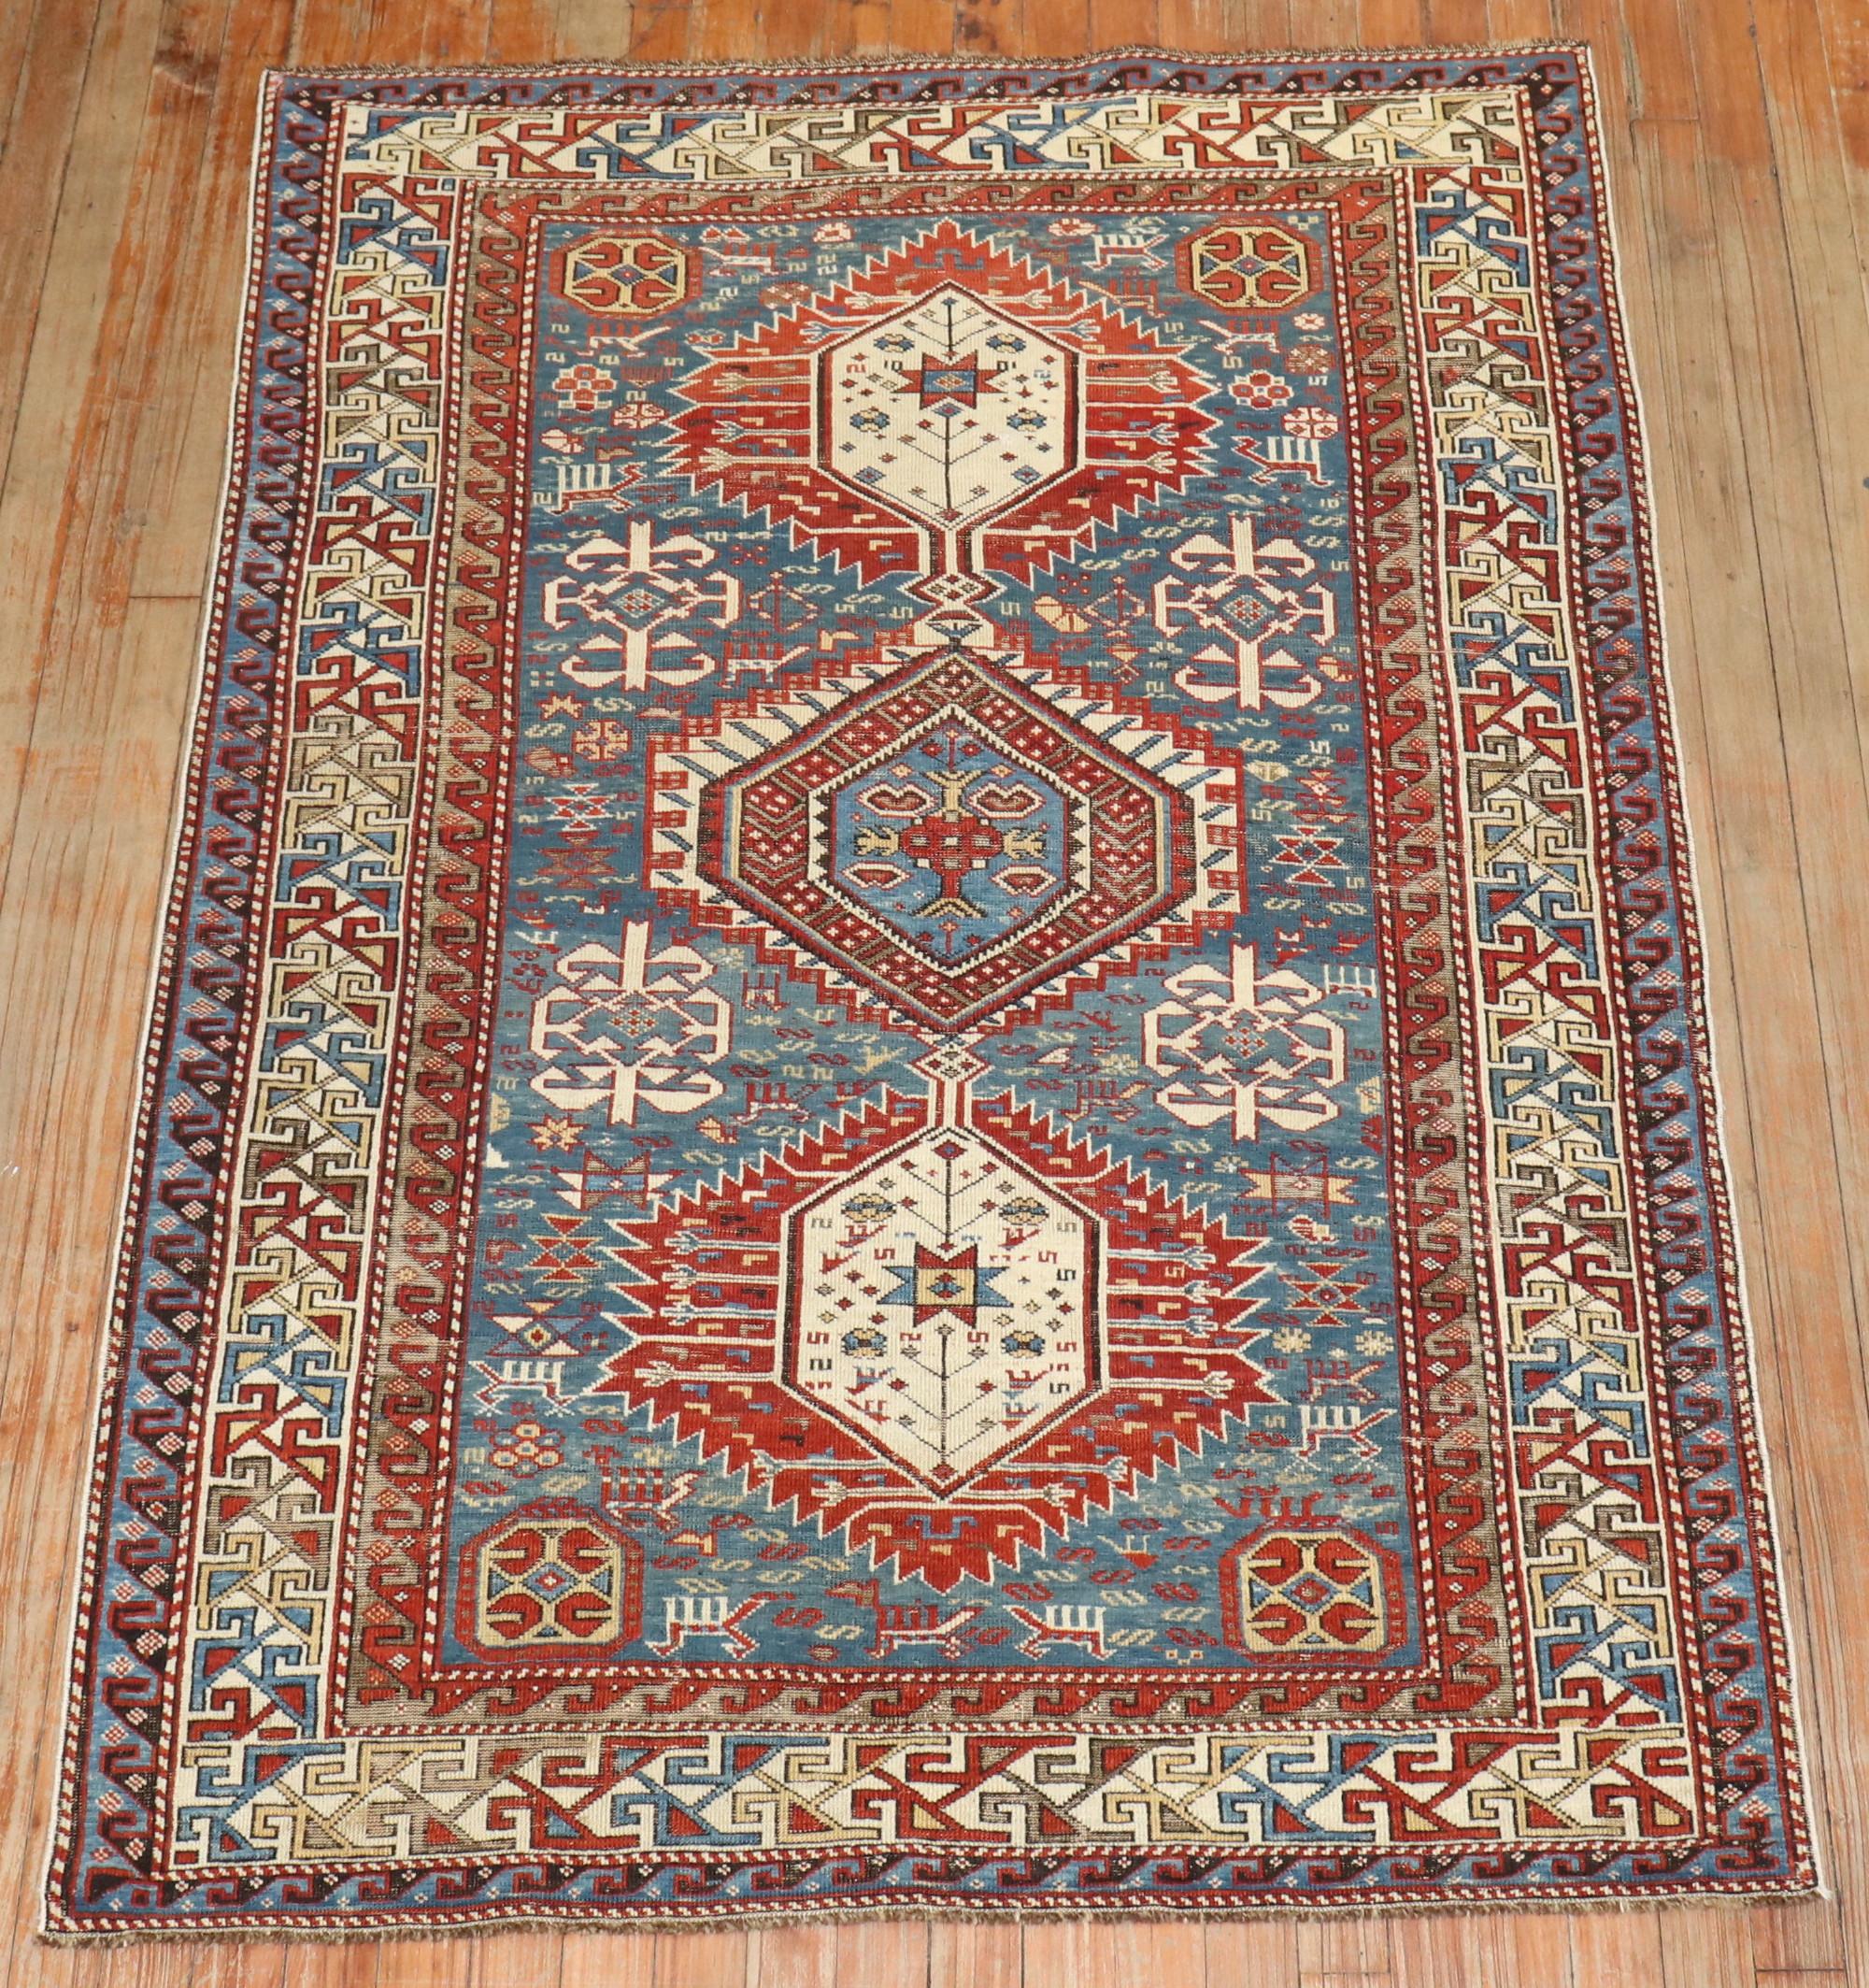 A late 19th century Tribal Antique Caucasian shirvan rug with a large-scale geometric pattern on a lovely sky blue field. 

3'9'' x 5'4''

Antique Shirvan Caucasian rugs of this caliber ceased to be produced around the turn of the 20th century. With